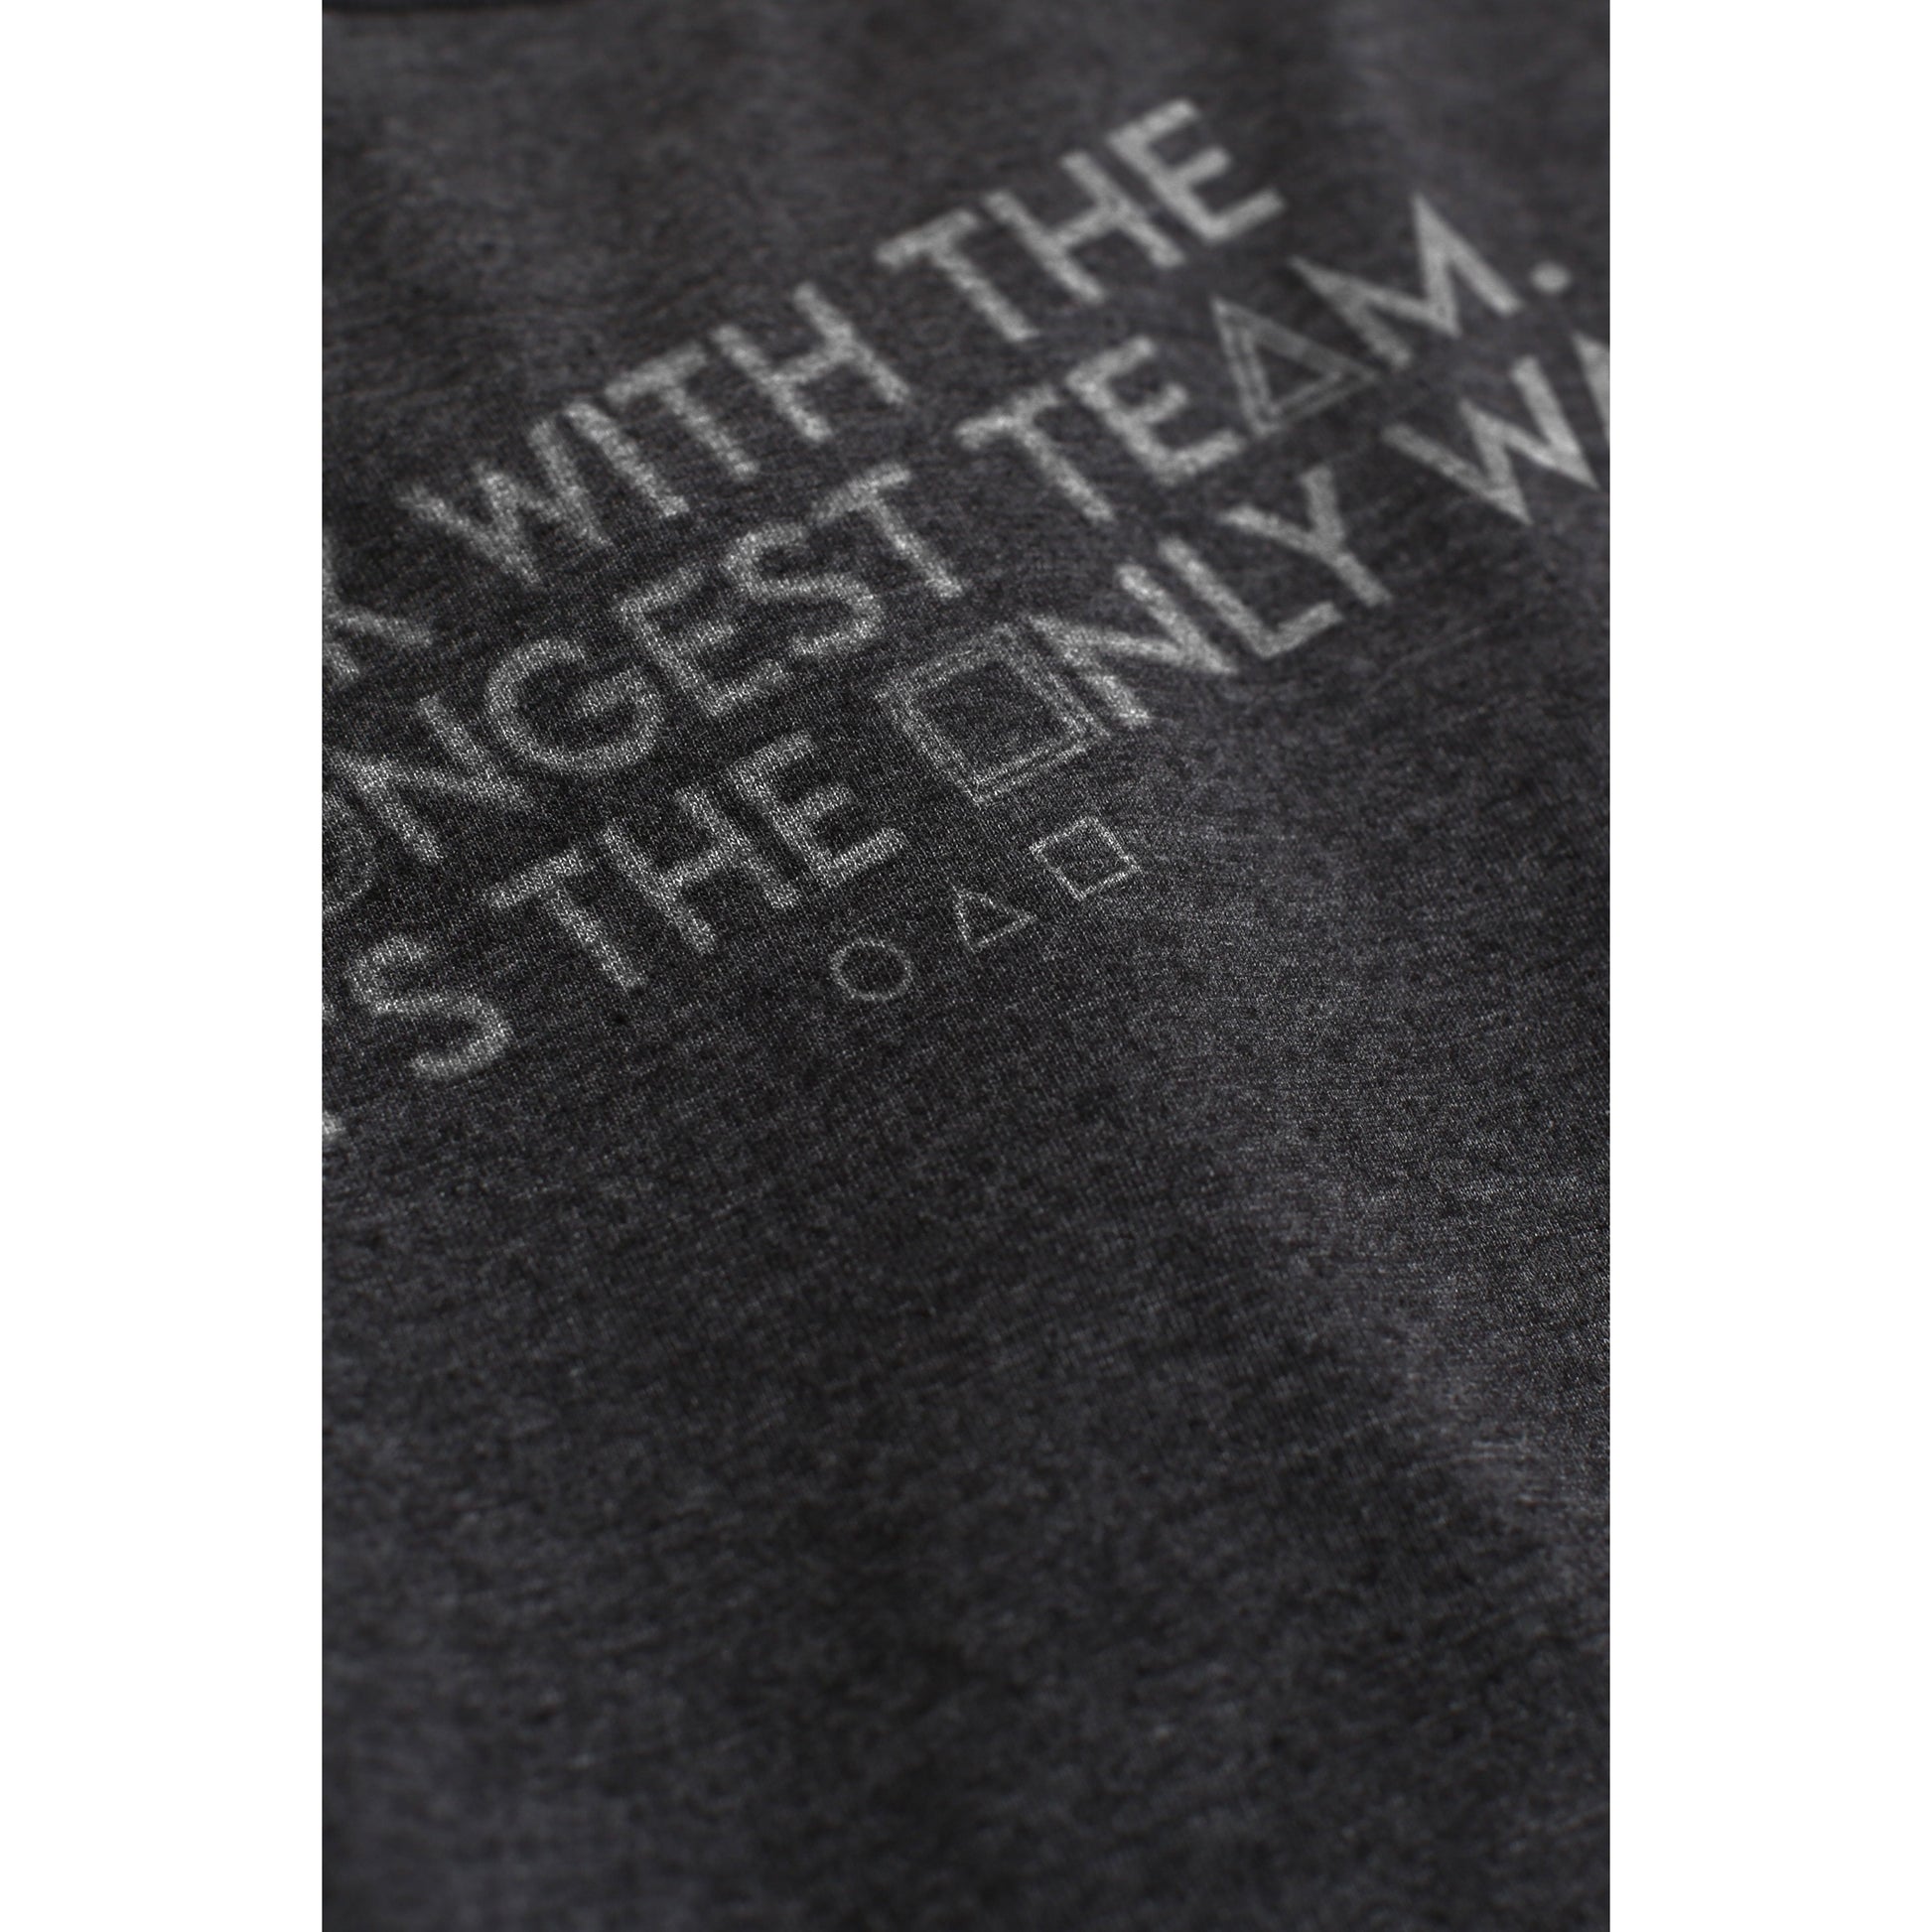 Stick With The Strongest Team. That's The Only Way. - threadtank | stories you can wear